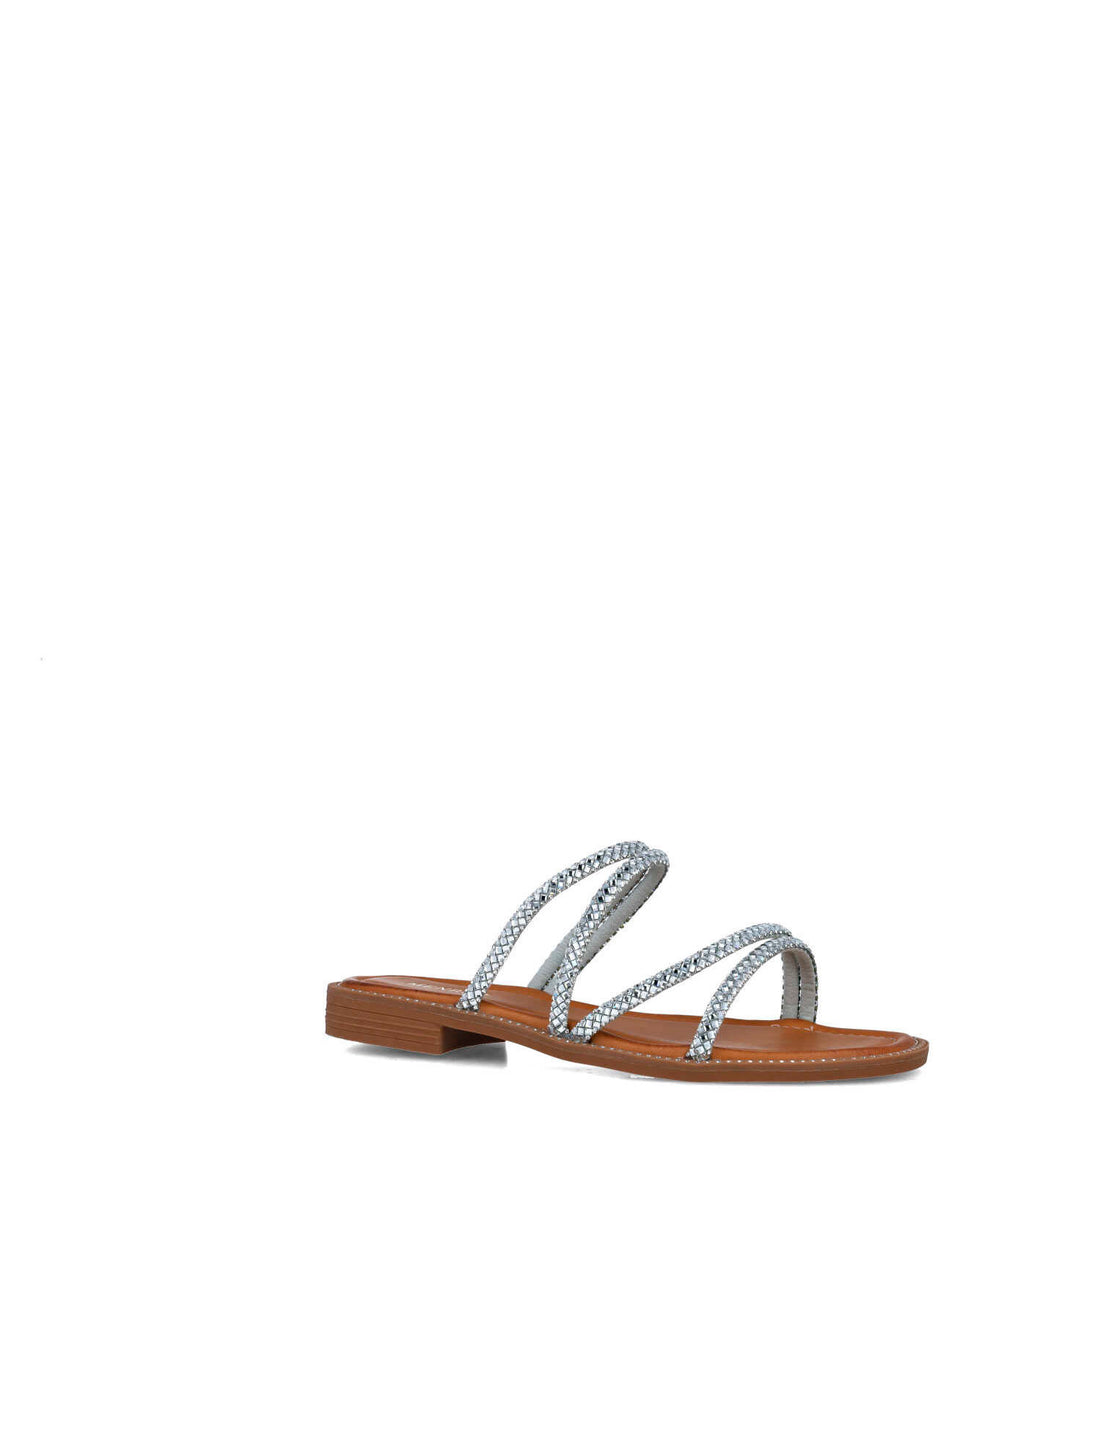 Brown Slippers With Silver Embellished Straps_24910_09_02